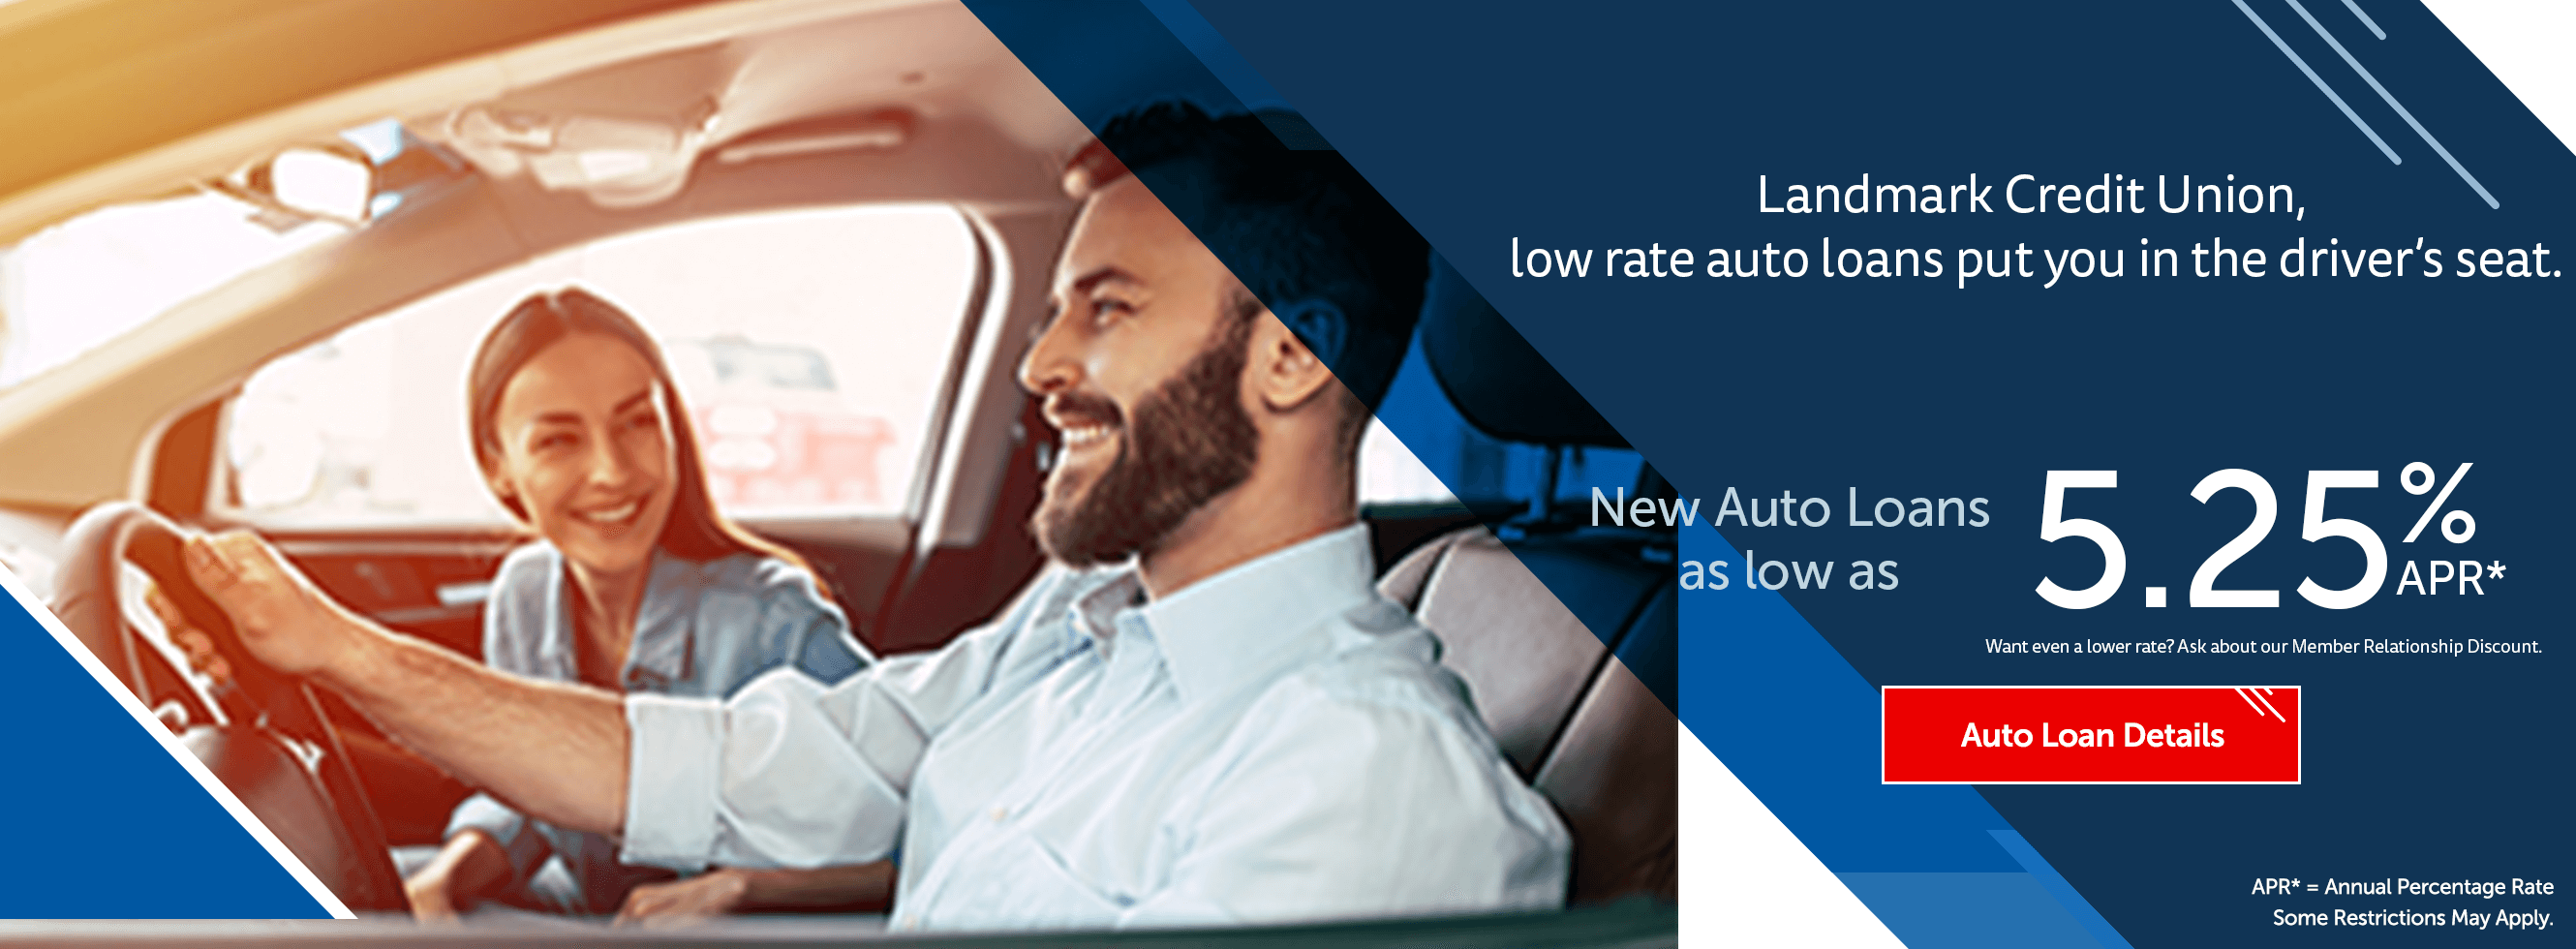 Landmark Credit Union low rate auto loans put you in the driver's seat.  